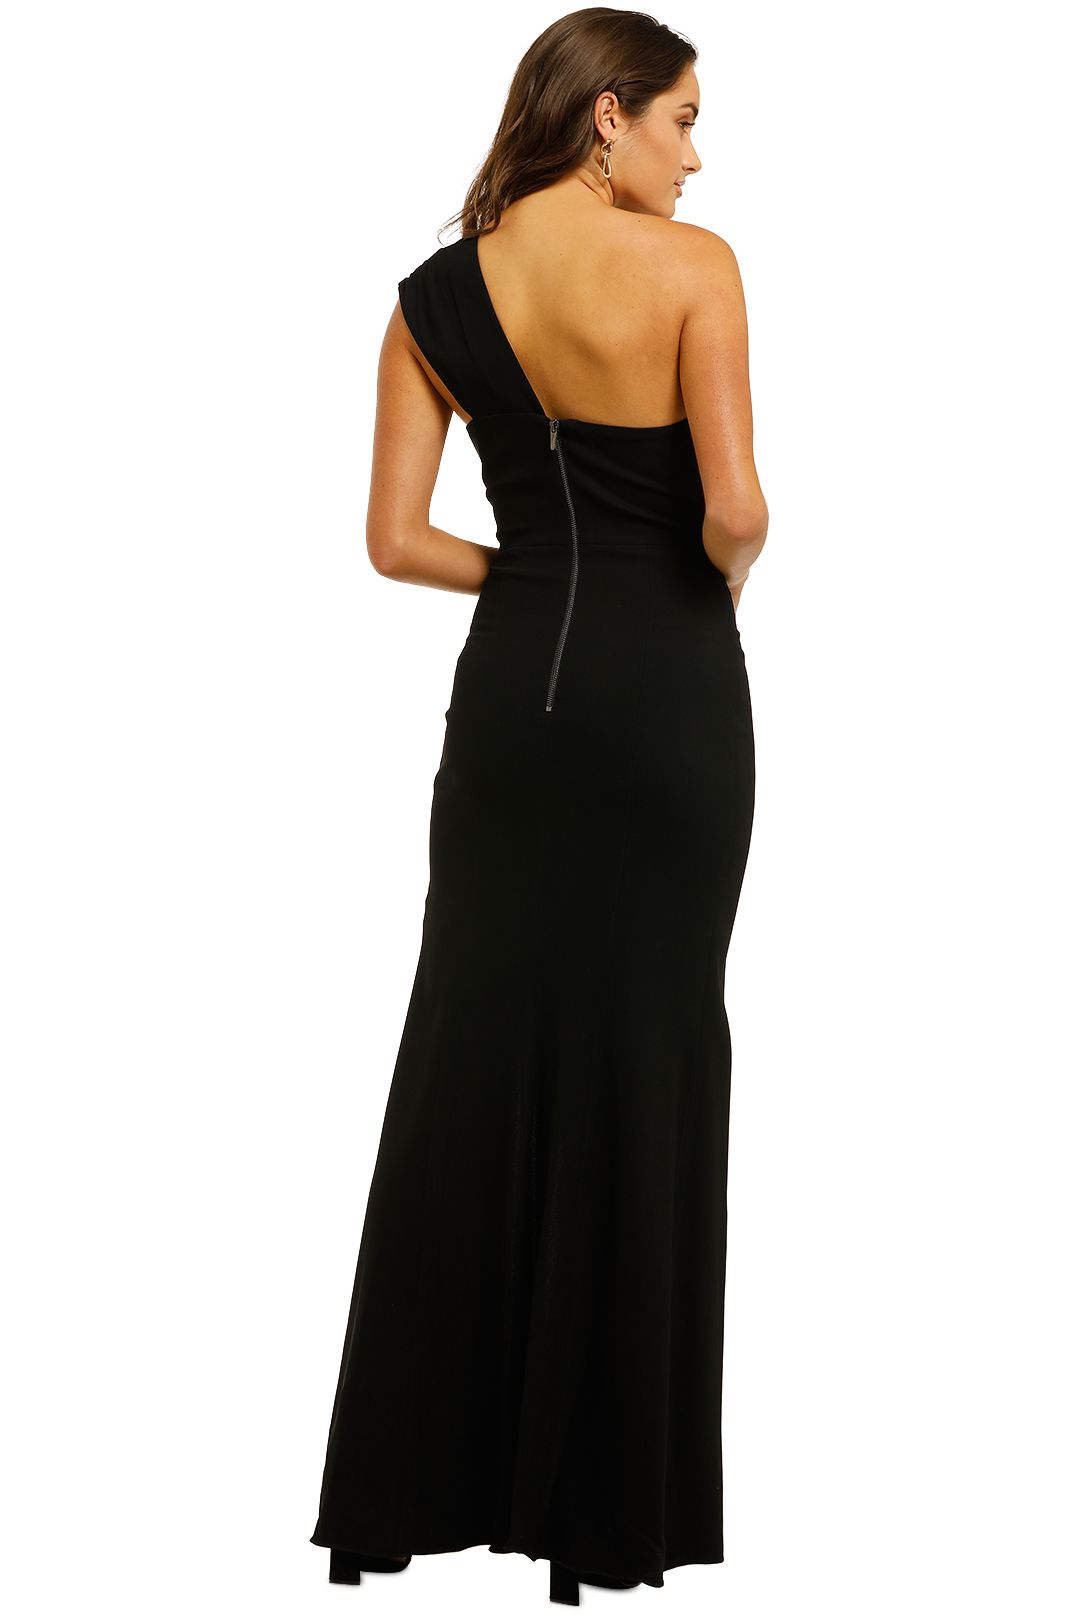 Ginger-and-Smart-Elixer-Gown-Black-Back